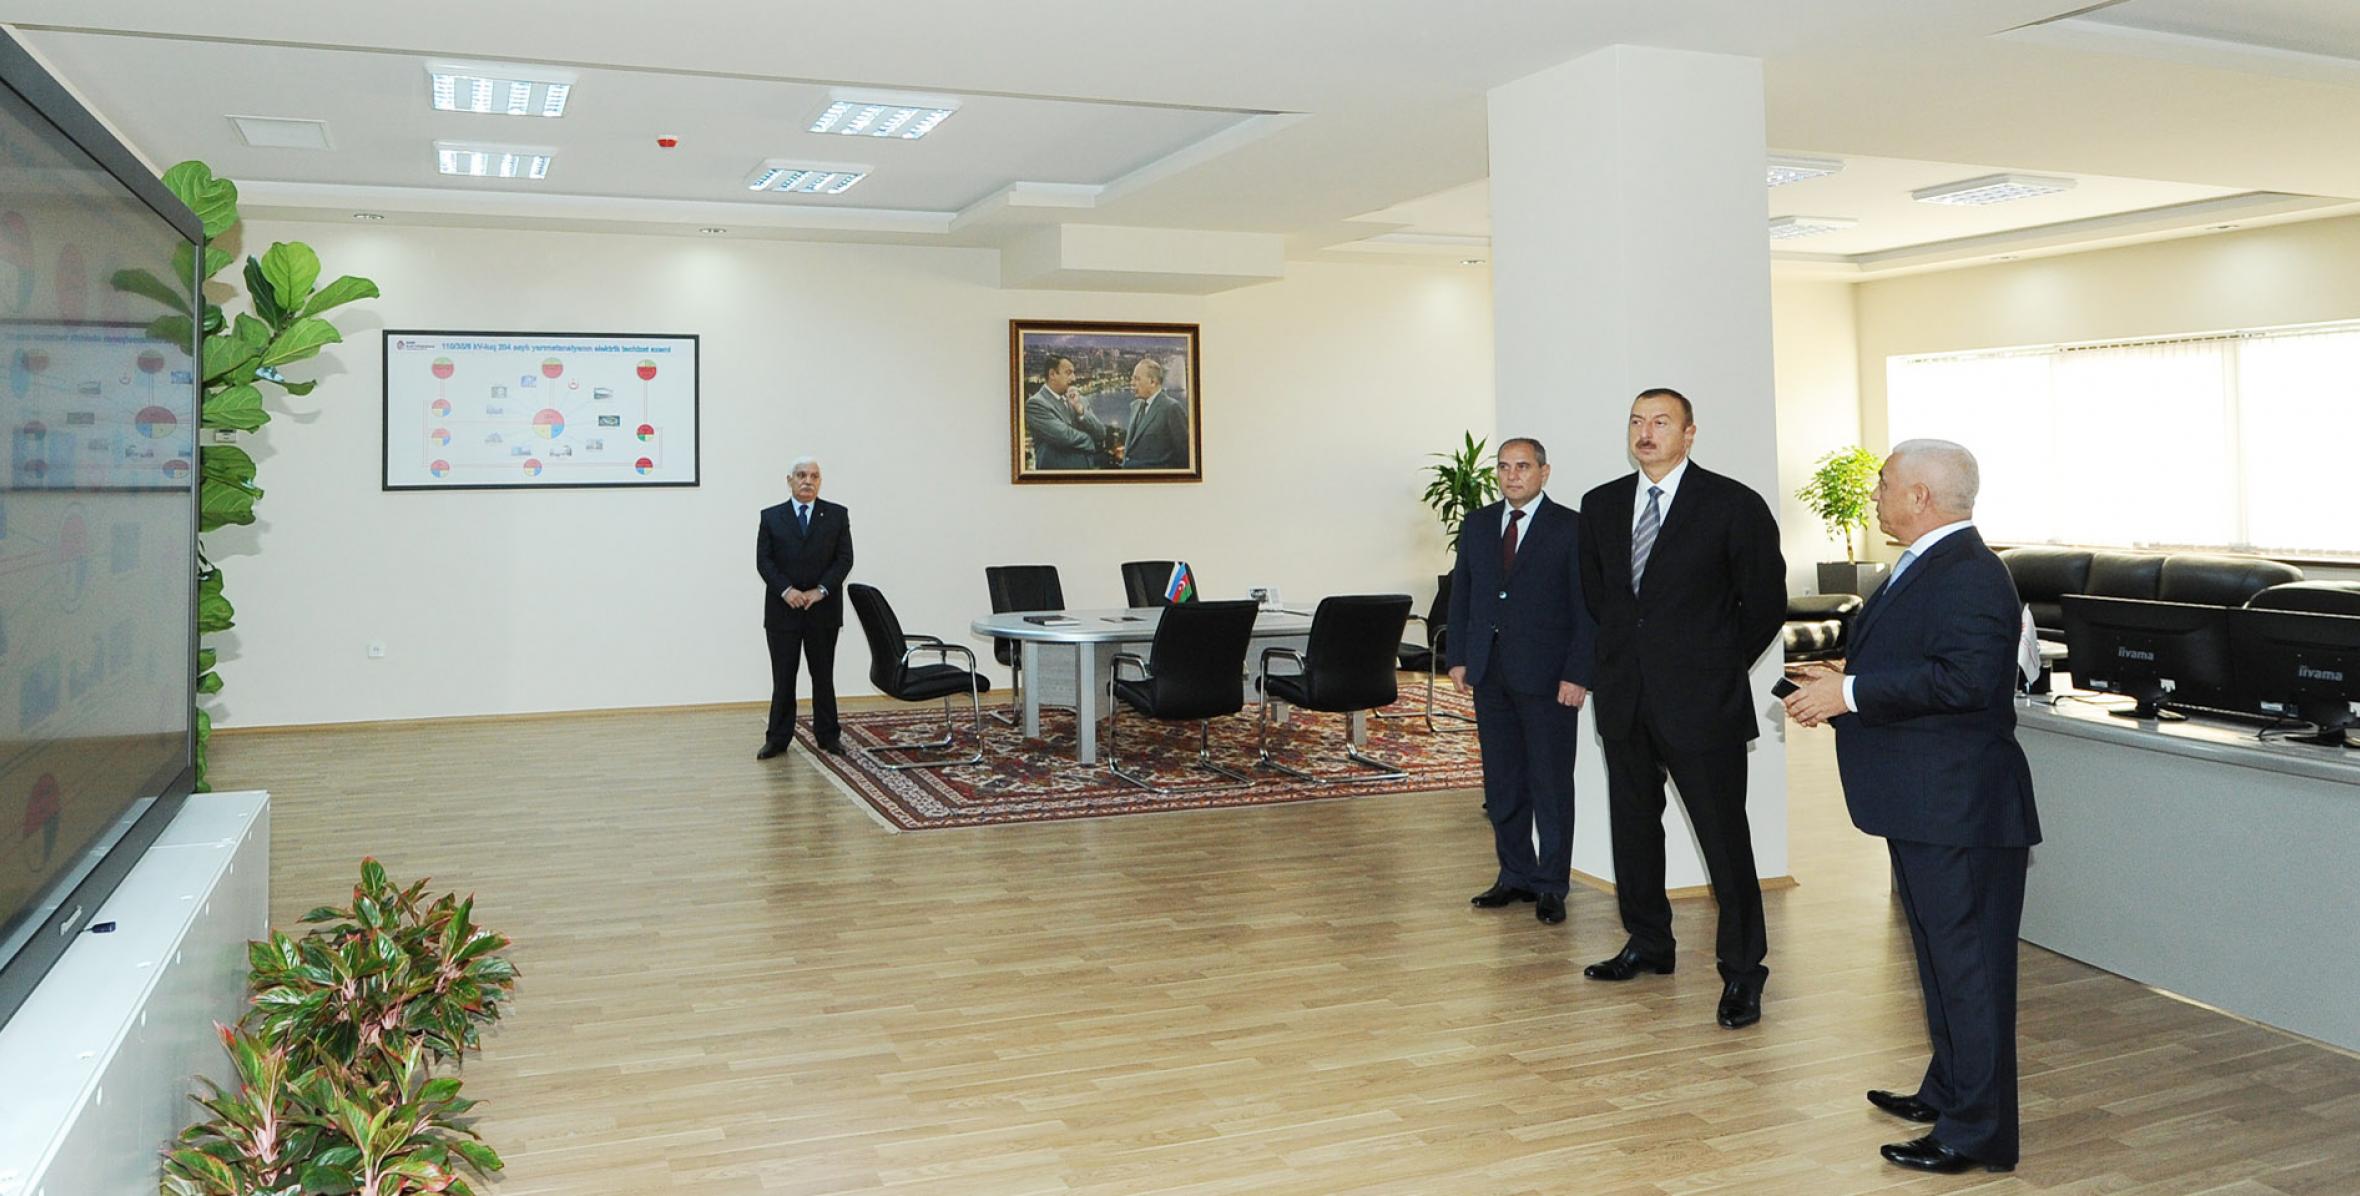 Ilham Aliyev attended the opening of electric power substation No 204 commissioned in the Nizami district of Baku